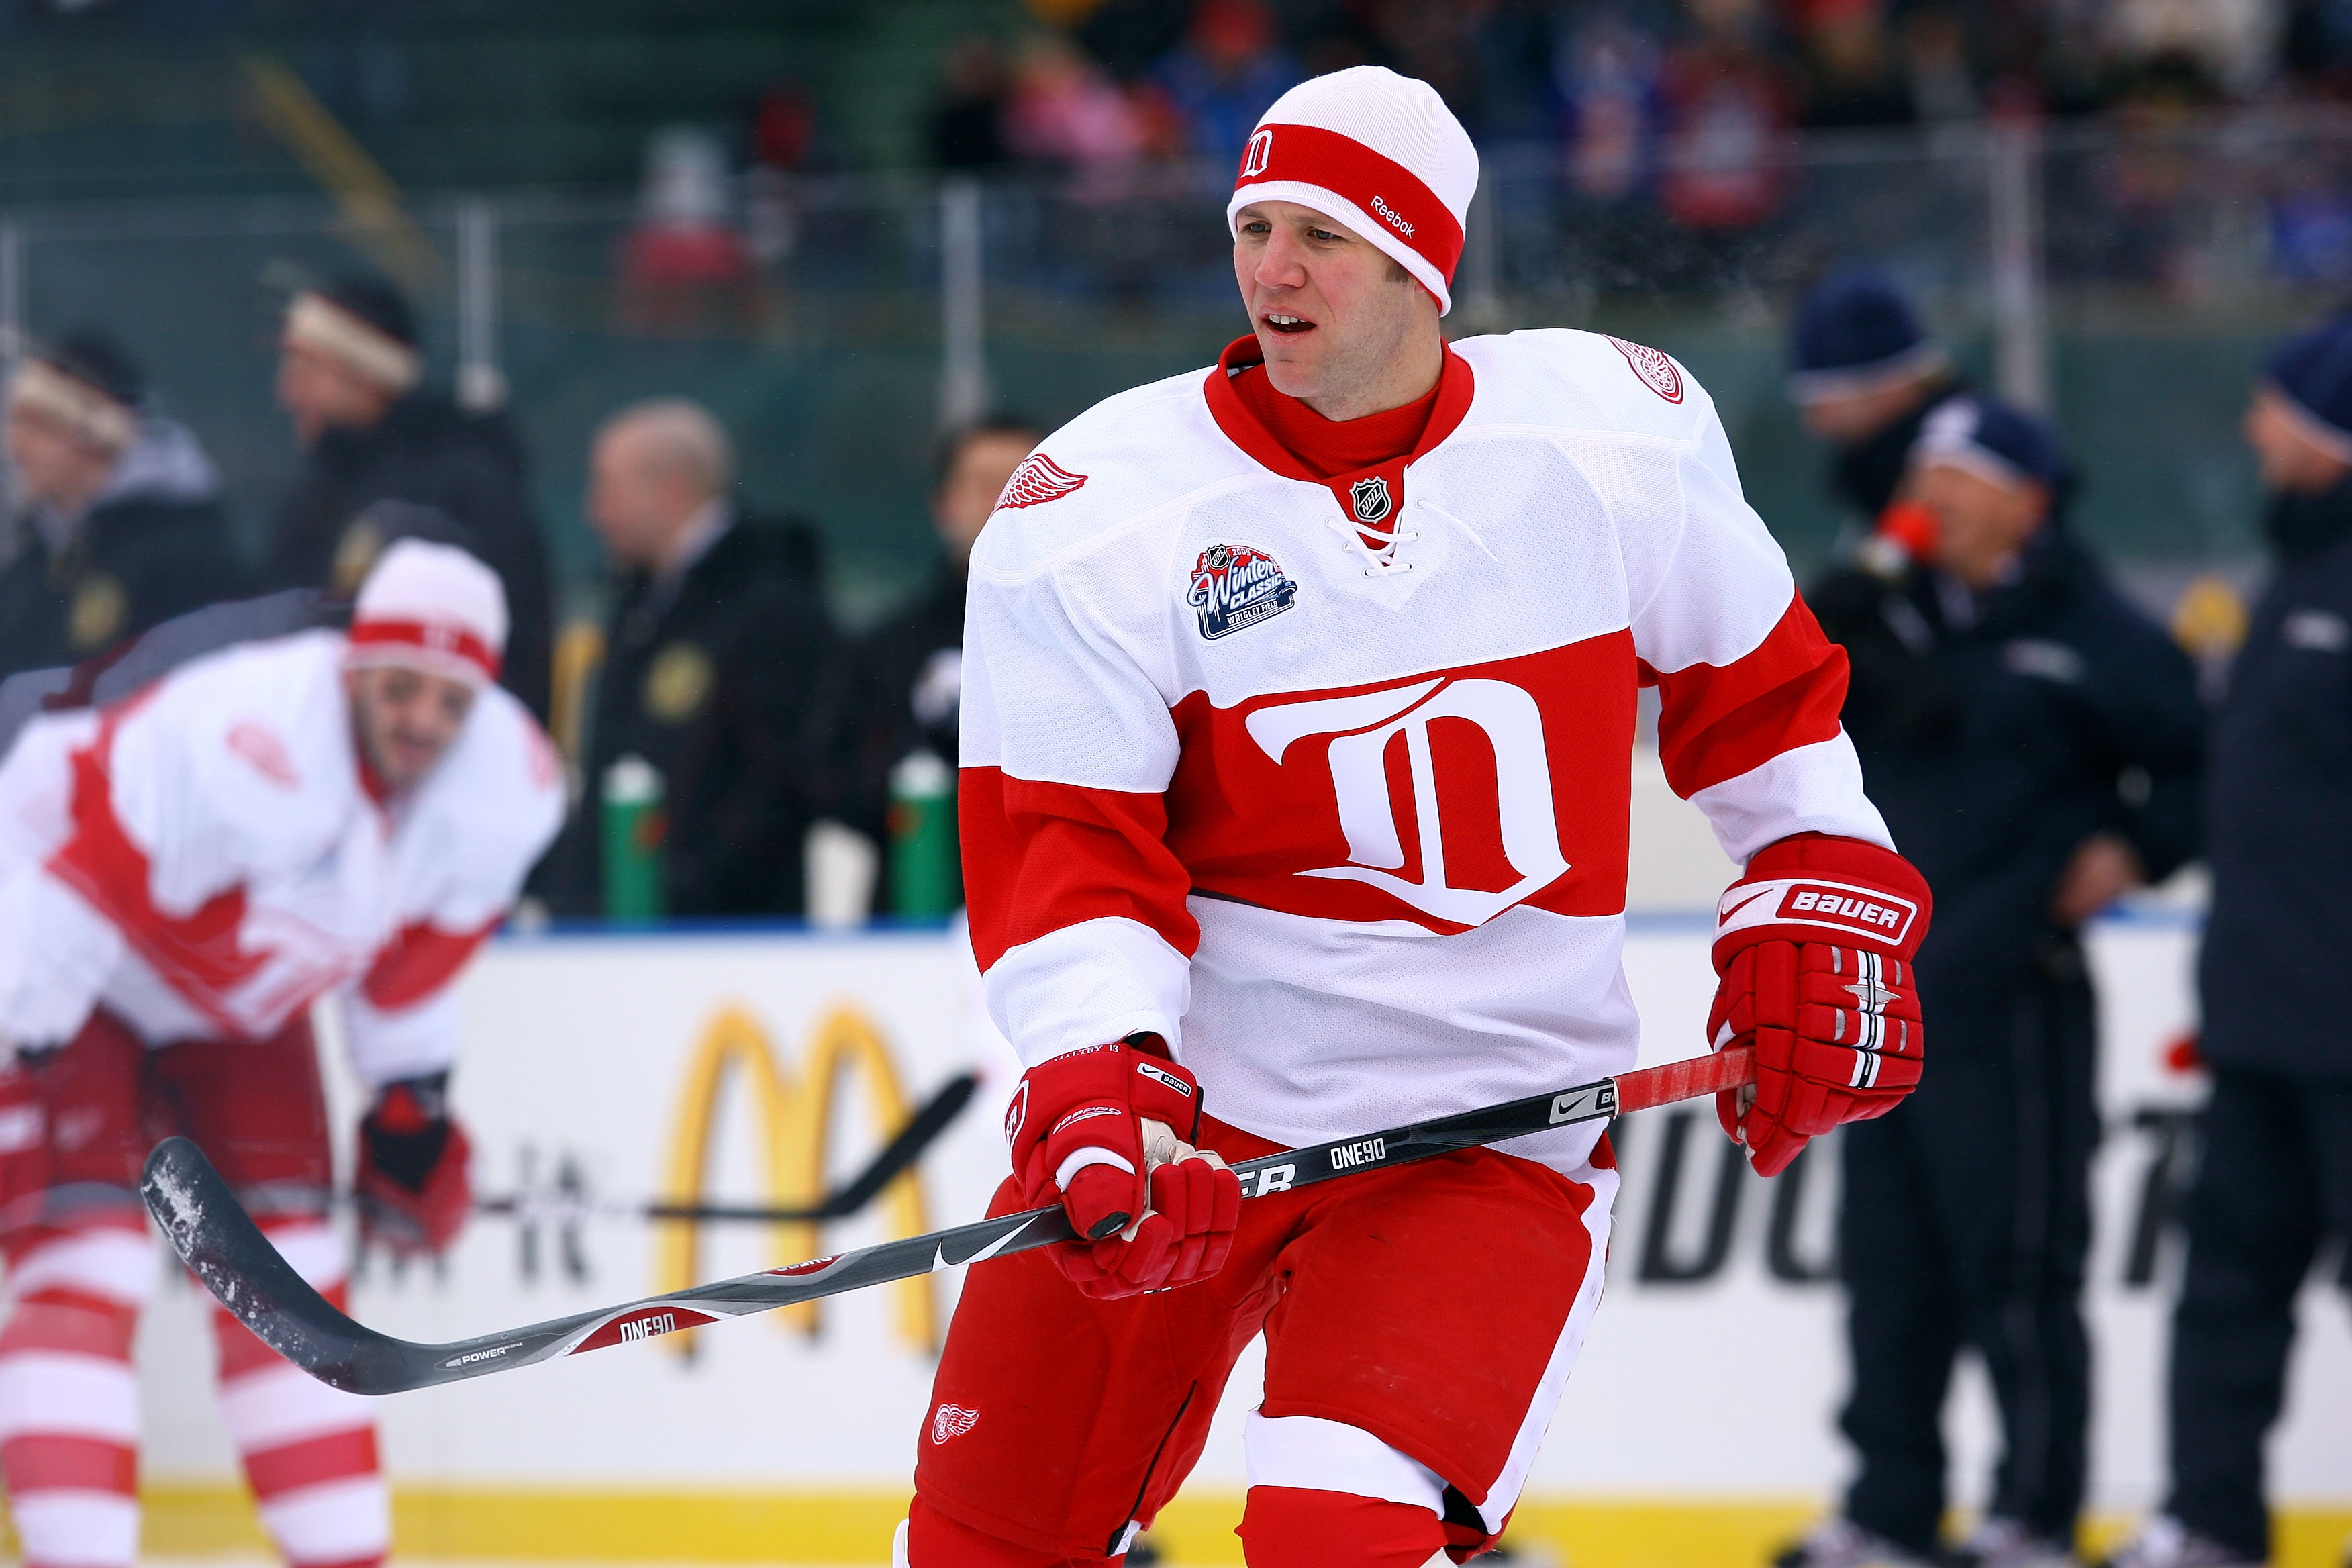 CHICAGO - JANUARY 01: Kirk Maltby #18 of the Detroit Red Wings skates during warm-ups against the Chicago Blackhawks during the NHL Winter Classic at Wrigley Field on January 1, 2009 in Chicago, Illinois. (Photo by Jamie Squire/Getty Images)